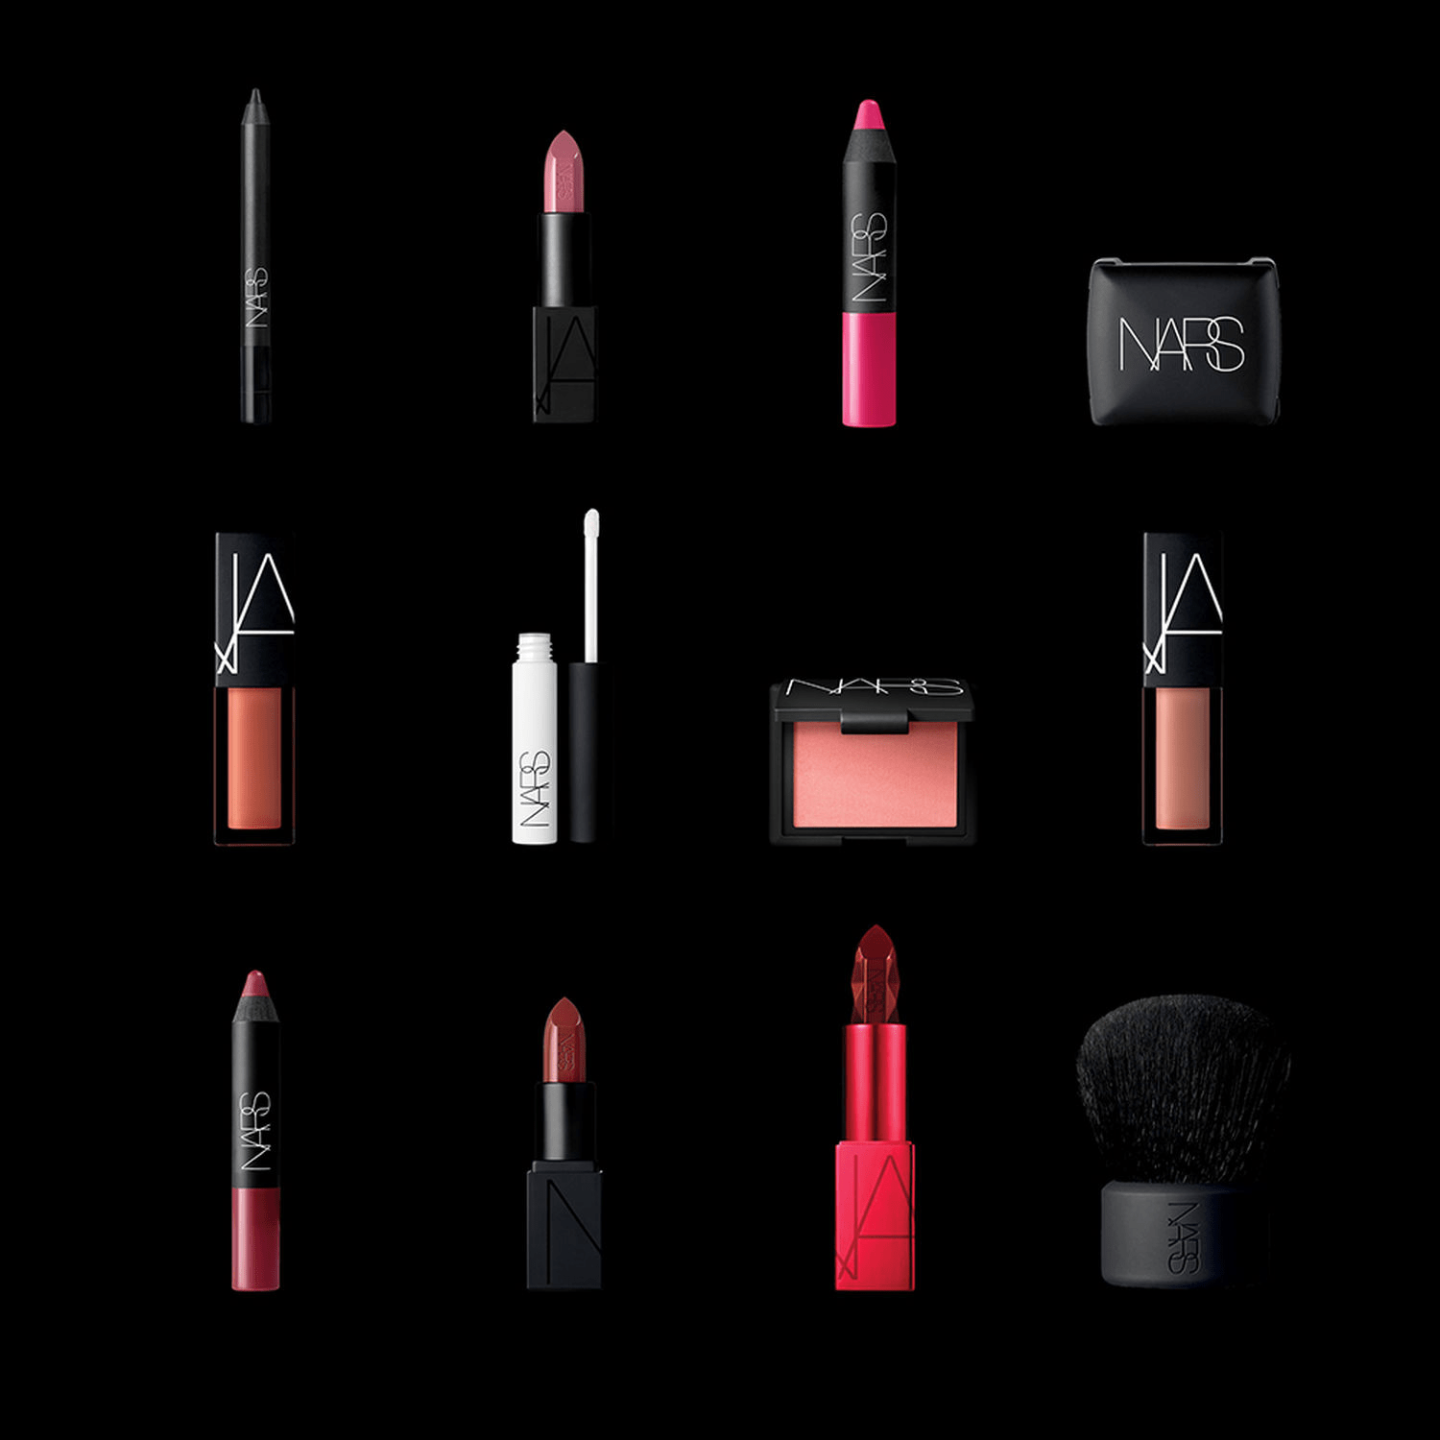 NARS Advent Calendar Available Now + Full Spoilers! Hello Subscription